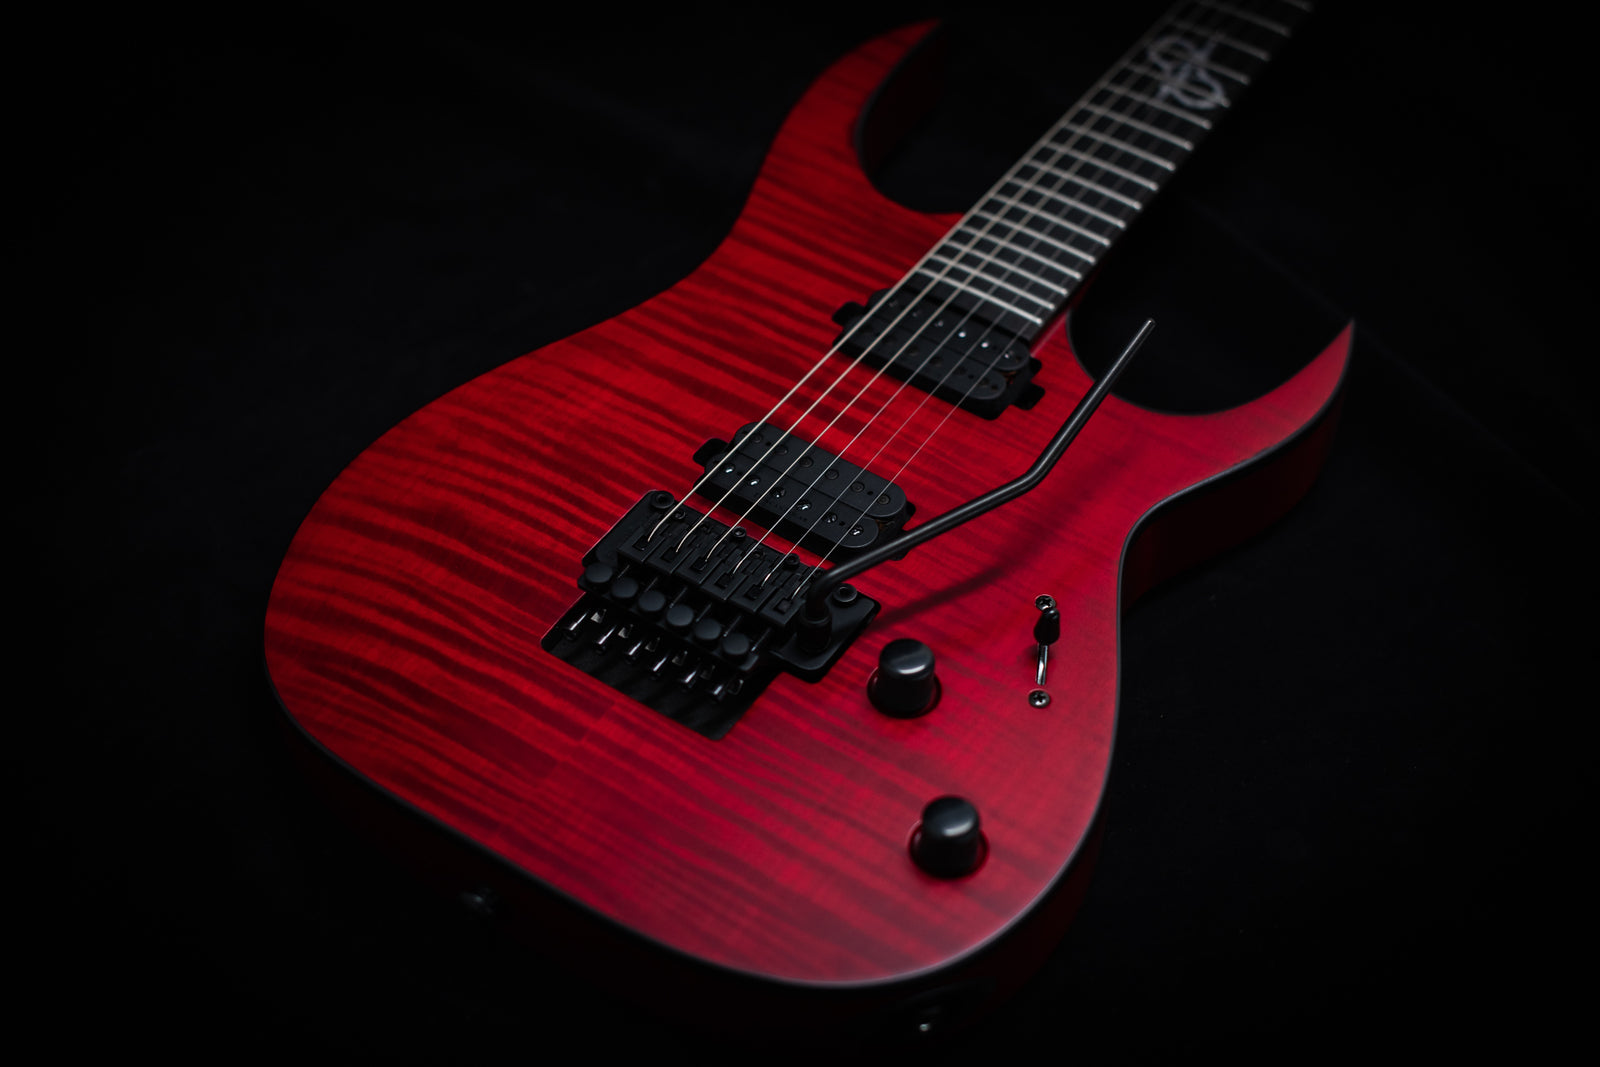 SOLAR S1.6FRFBR Electric Guitar - Flame Blood Red Matte